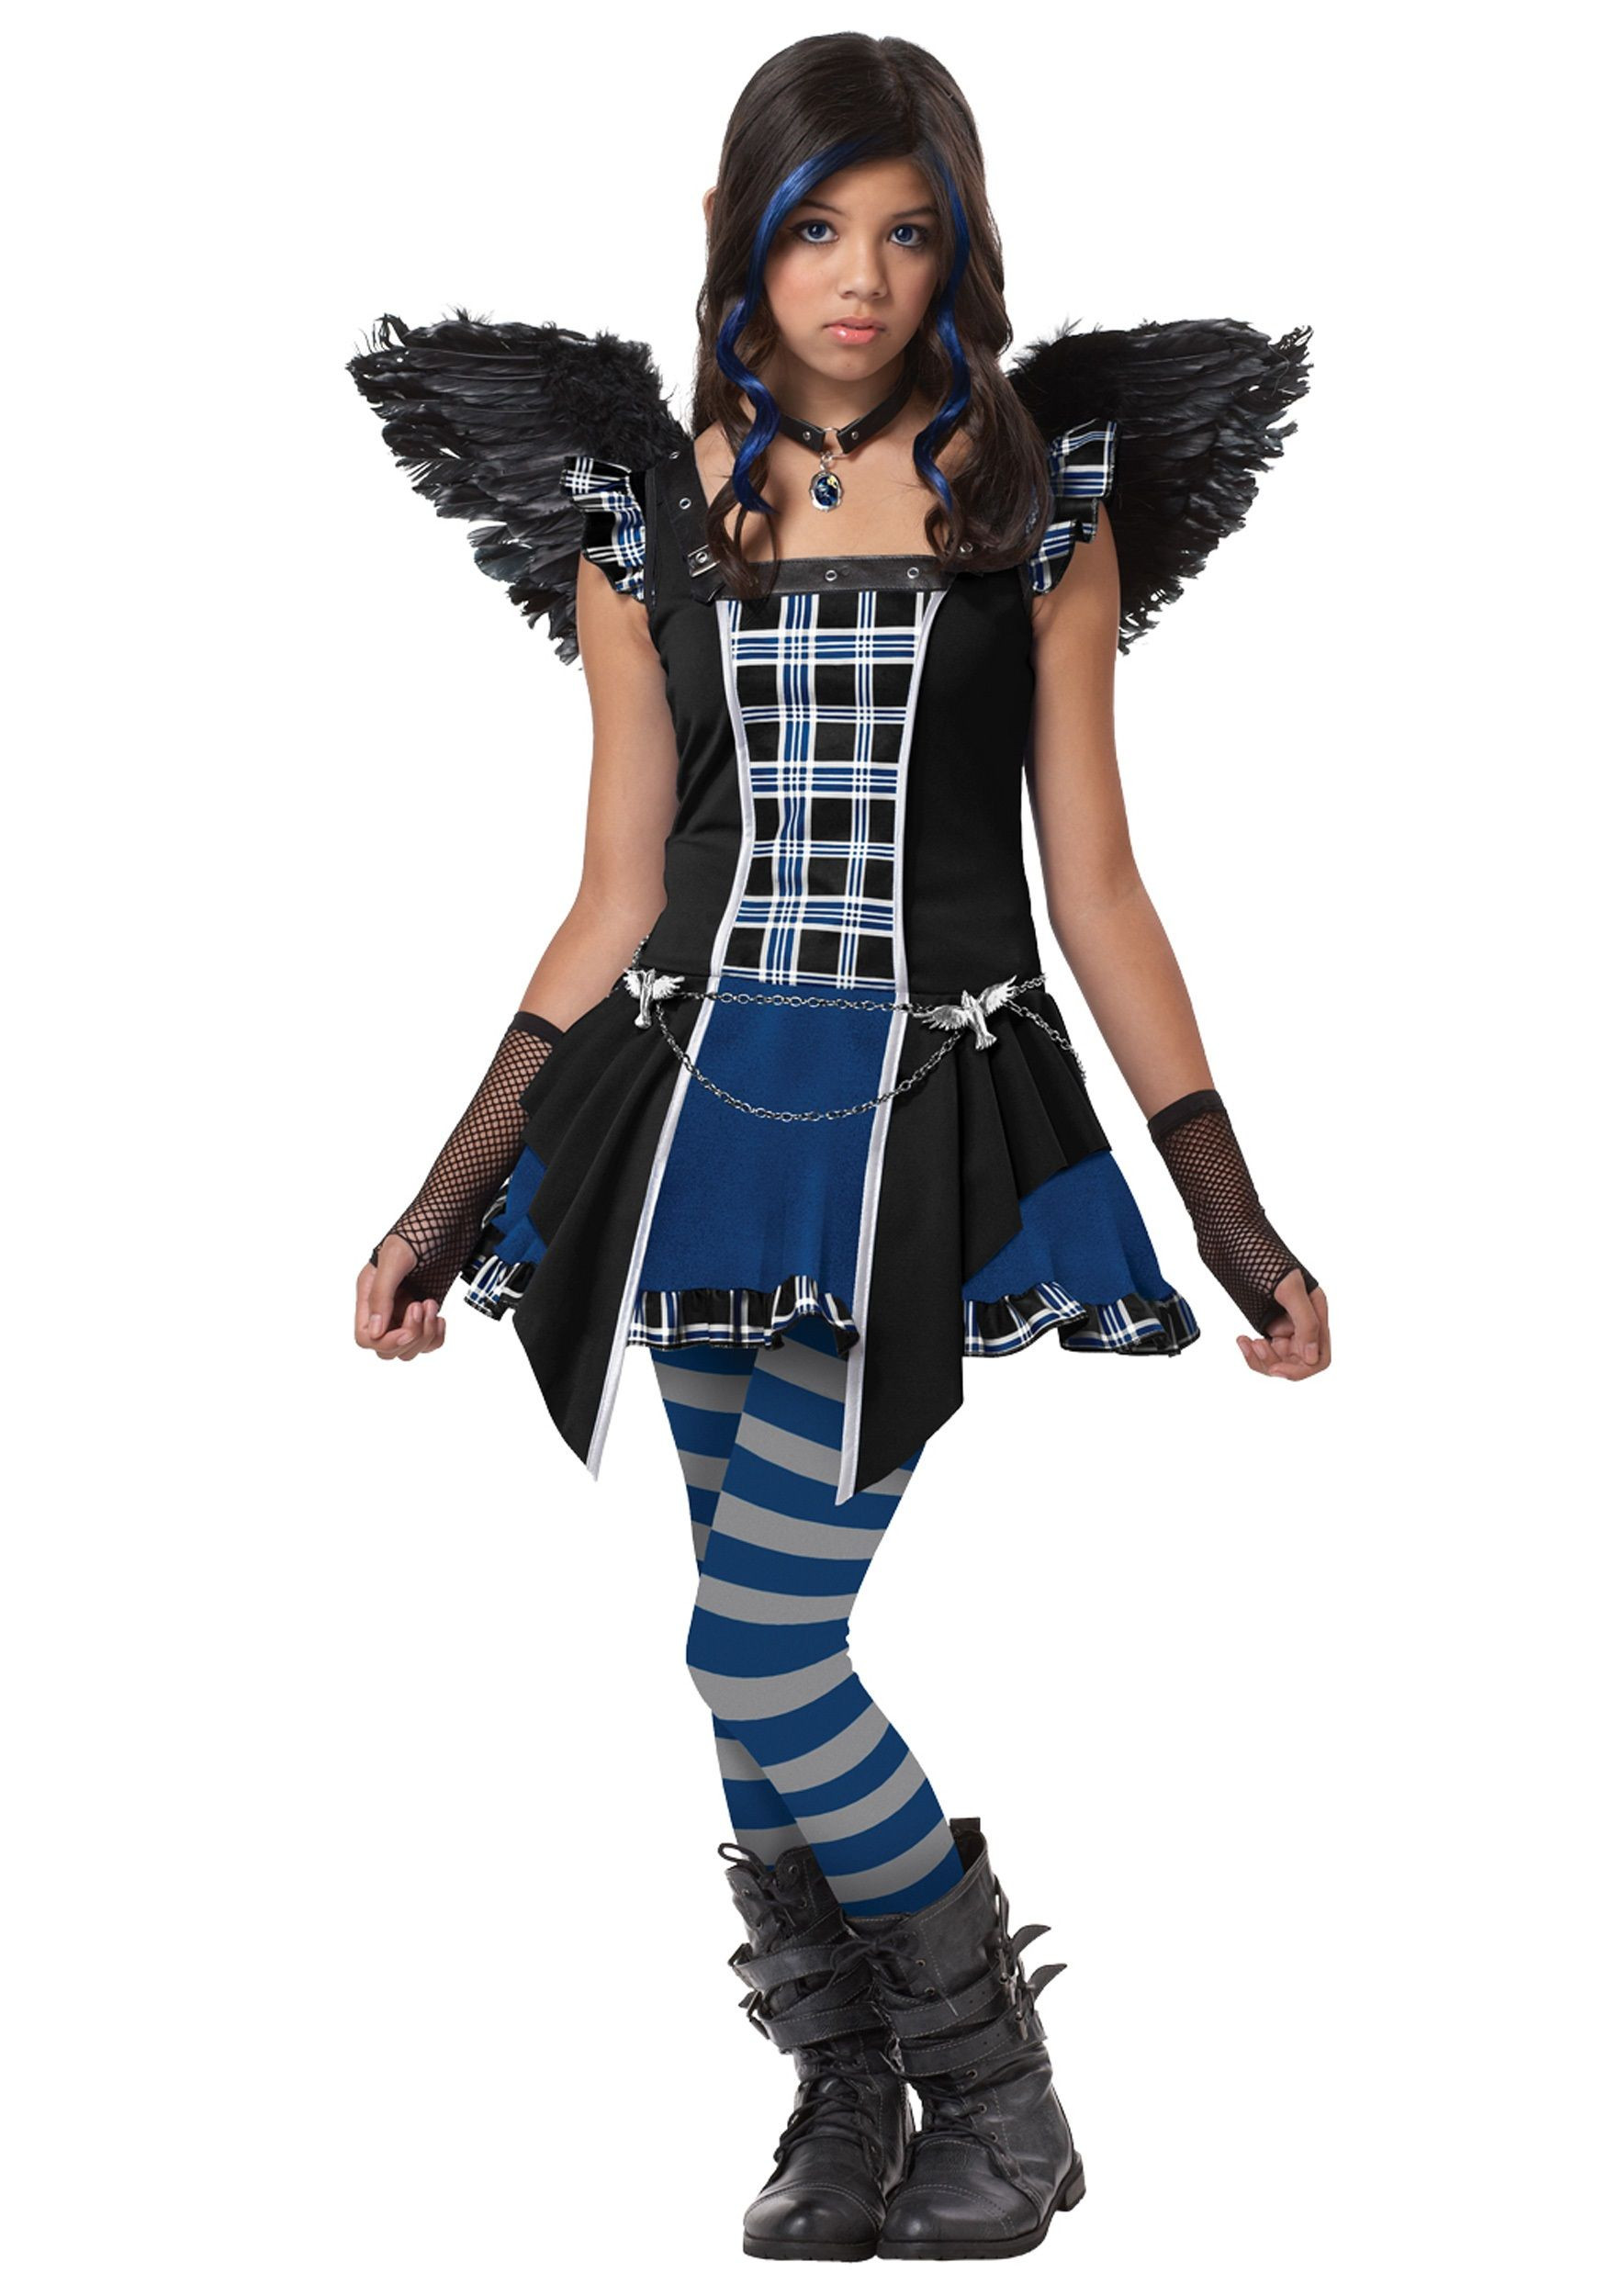 DIY Costumes For Tweens
 Halloween Costumes For Kids Girls 10 And Up Scary